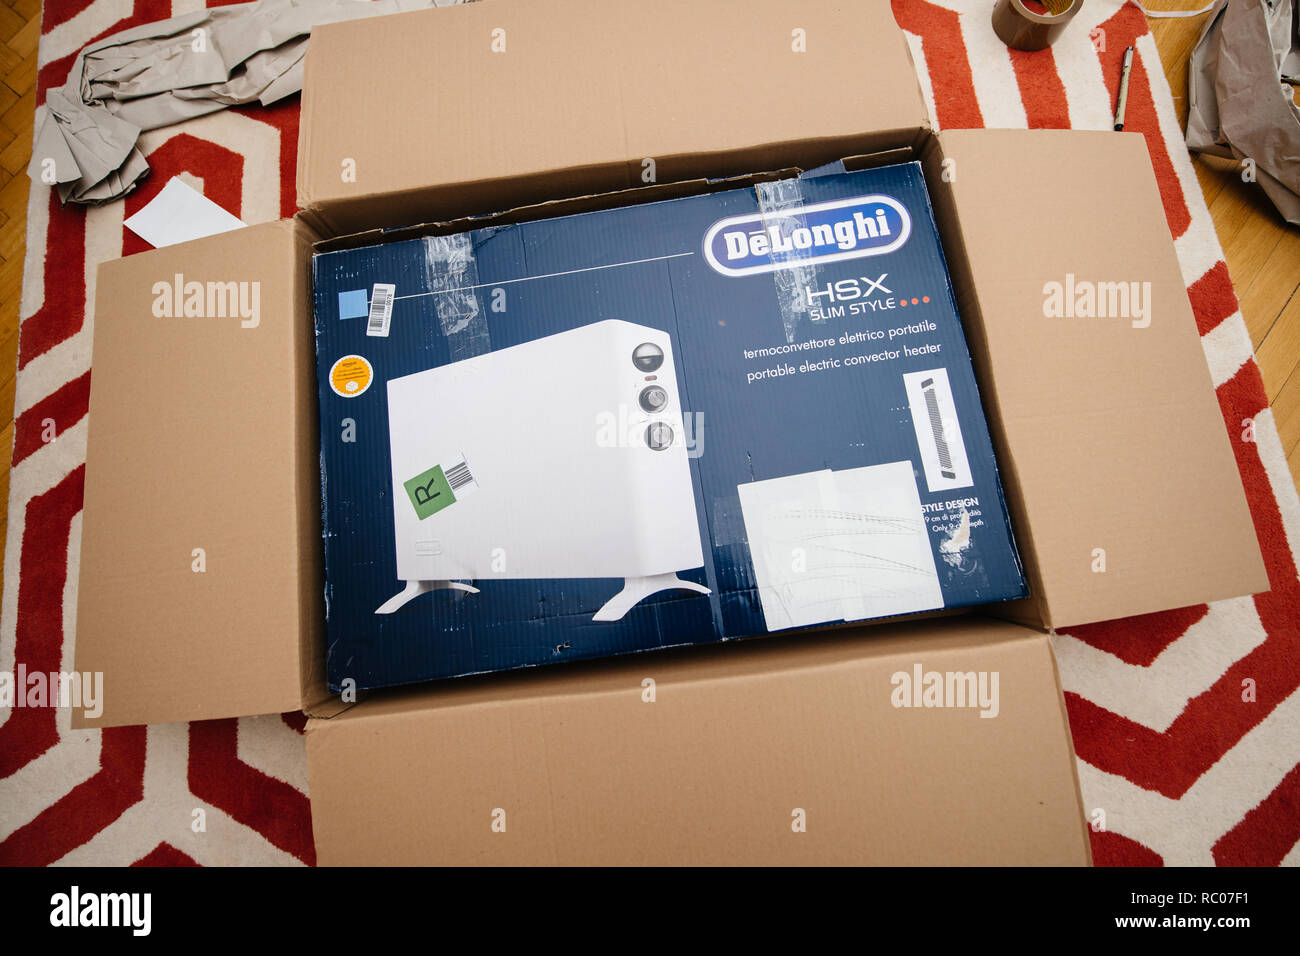 PARIS, FRANCE - FEB 7, 2018: Unboxing large cardboard box containing italian DeLonghi air convection heater bought from Amazon Warehouse Deals Stock Photo